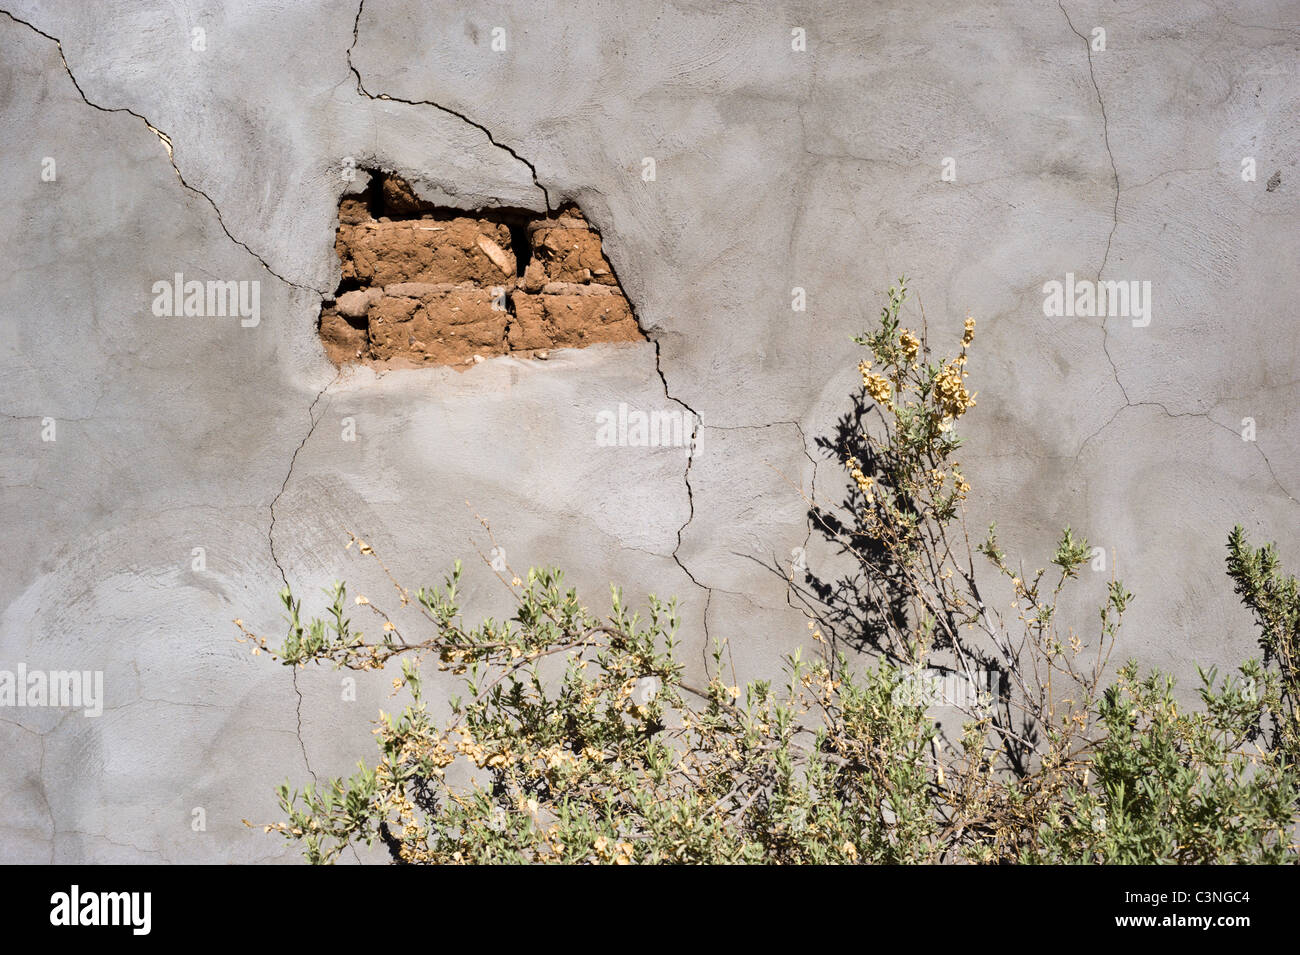 Cracking plaster reveals an old adobe wall in the Hondo Valley, Hondo, New Mexico. Stock Photo